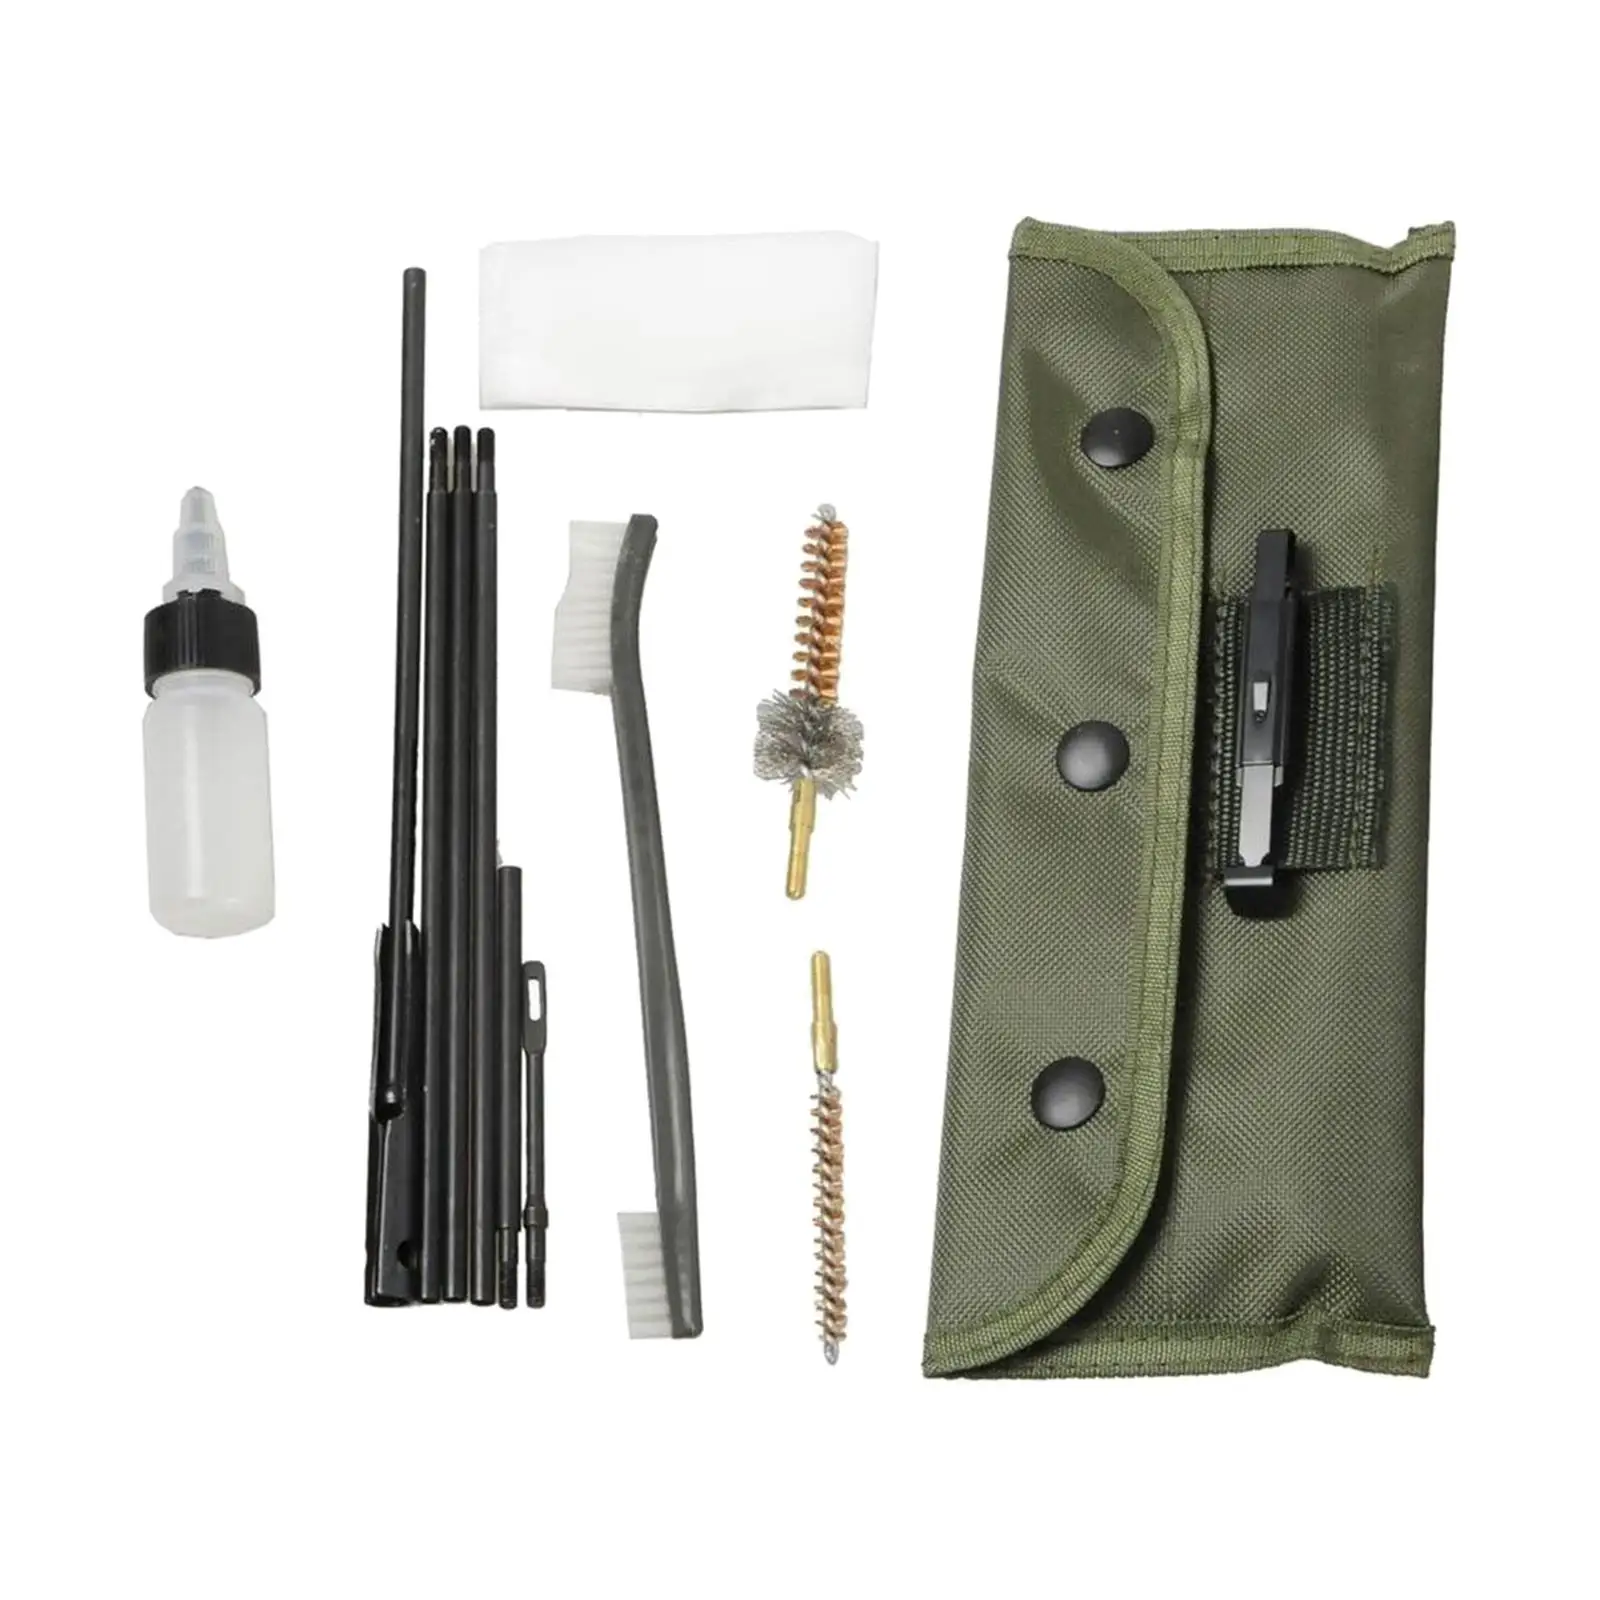 Multifunctional Pipe Cleaning Brush Kit with Canvas Pouch Dual Ended Nylon Brush and Oil Bottle Professional Durable Versatile